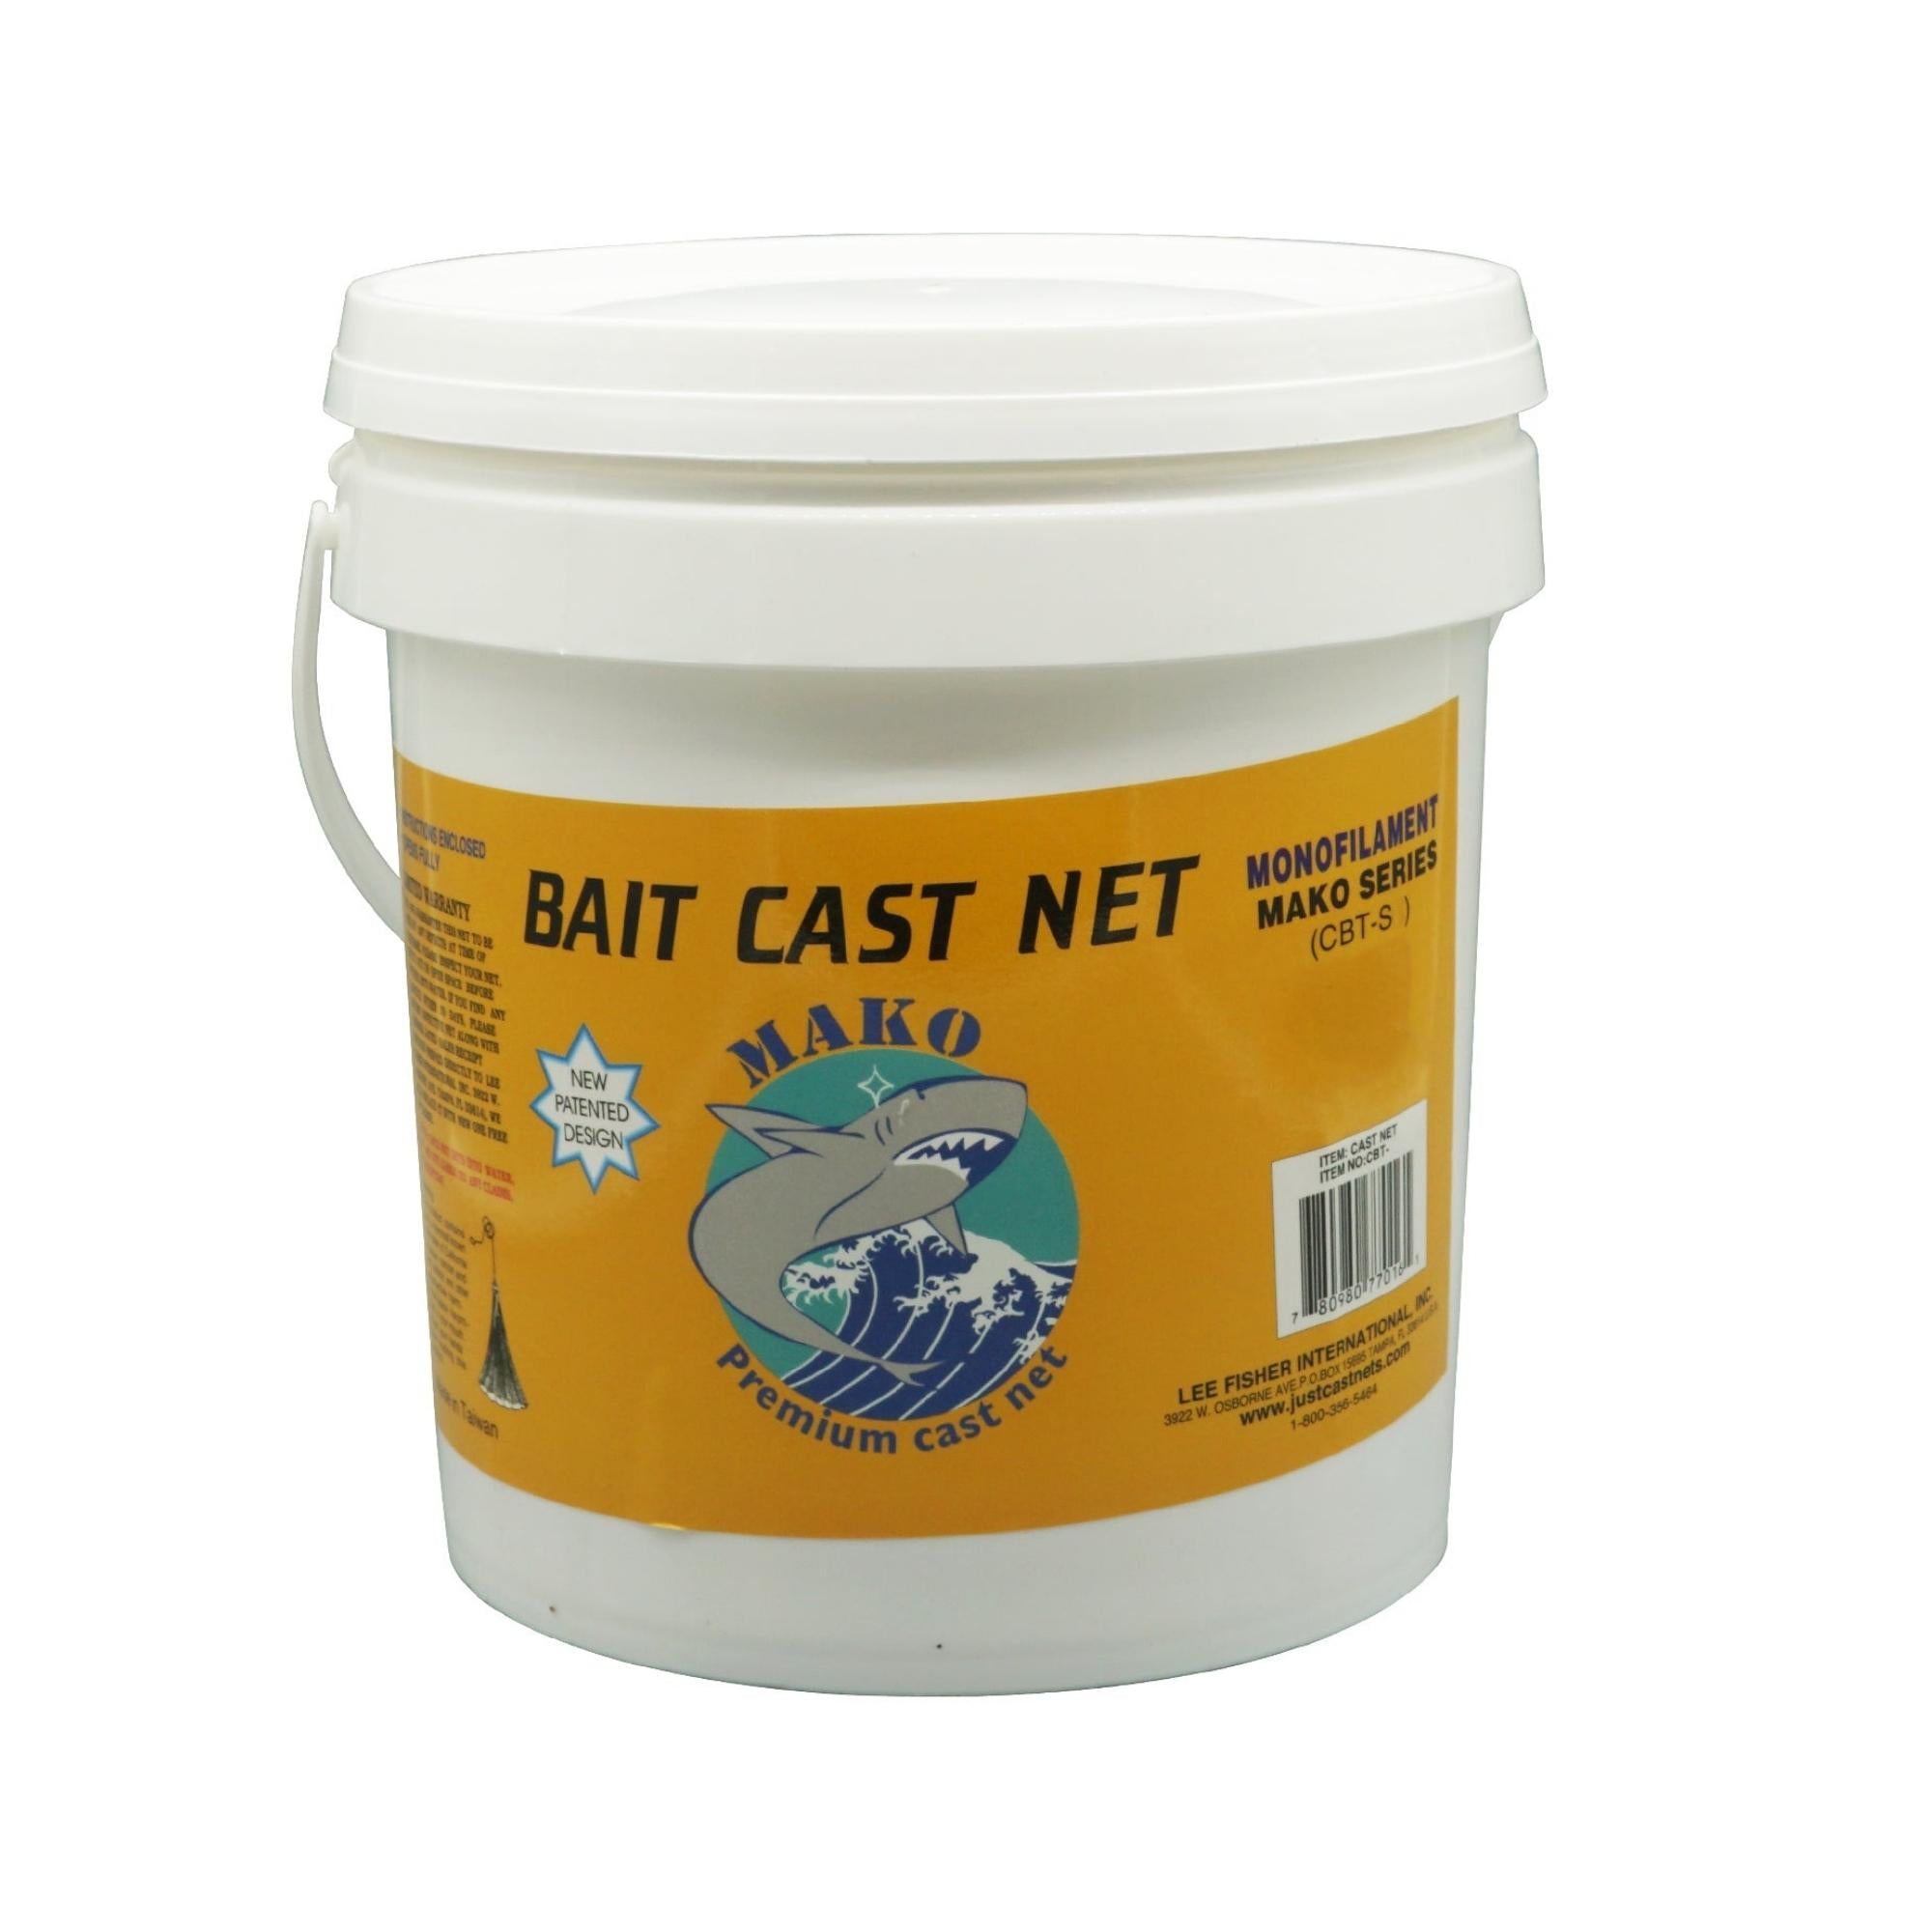 Completed Monofilament Nylon Fishing/Fish Casting/Cast Net with